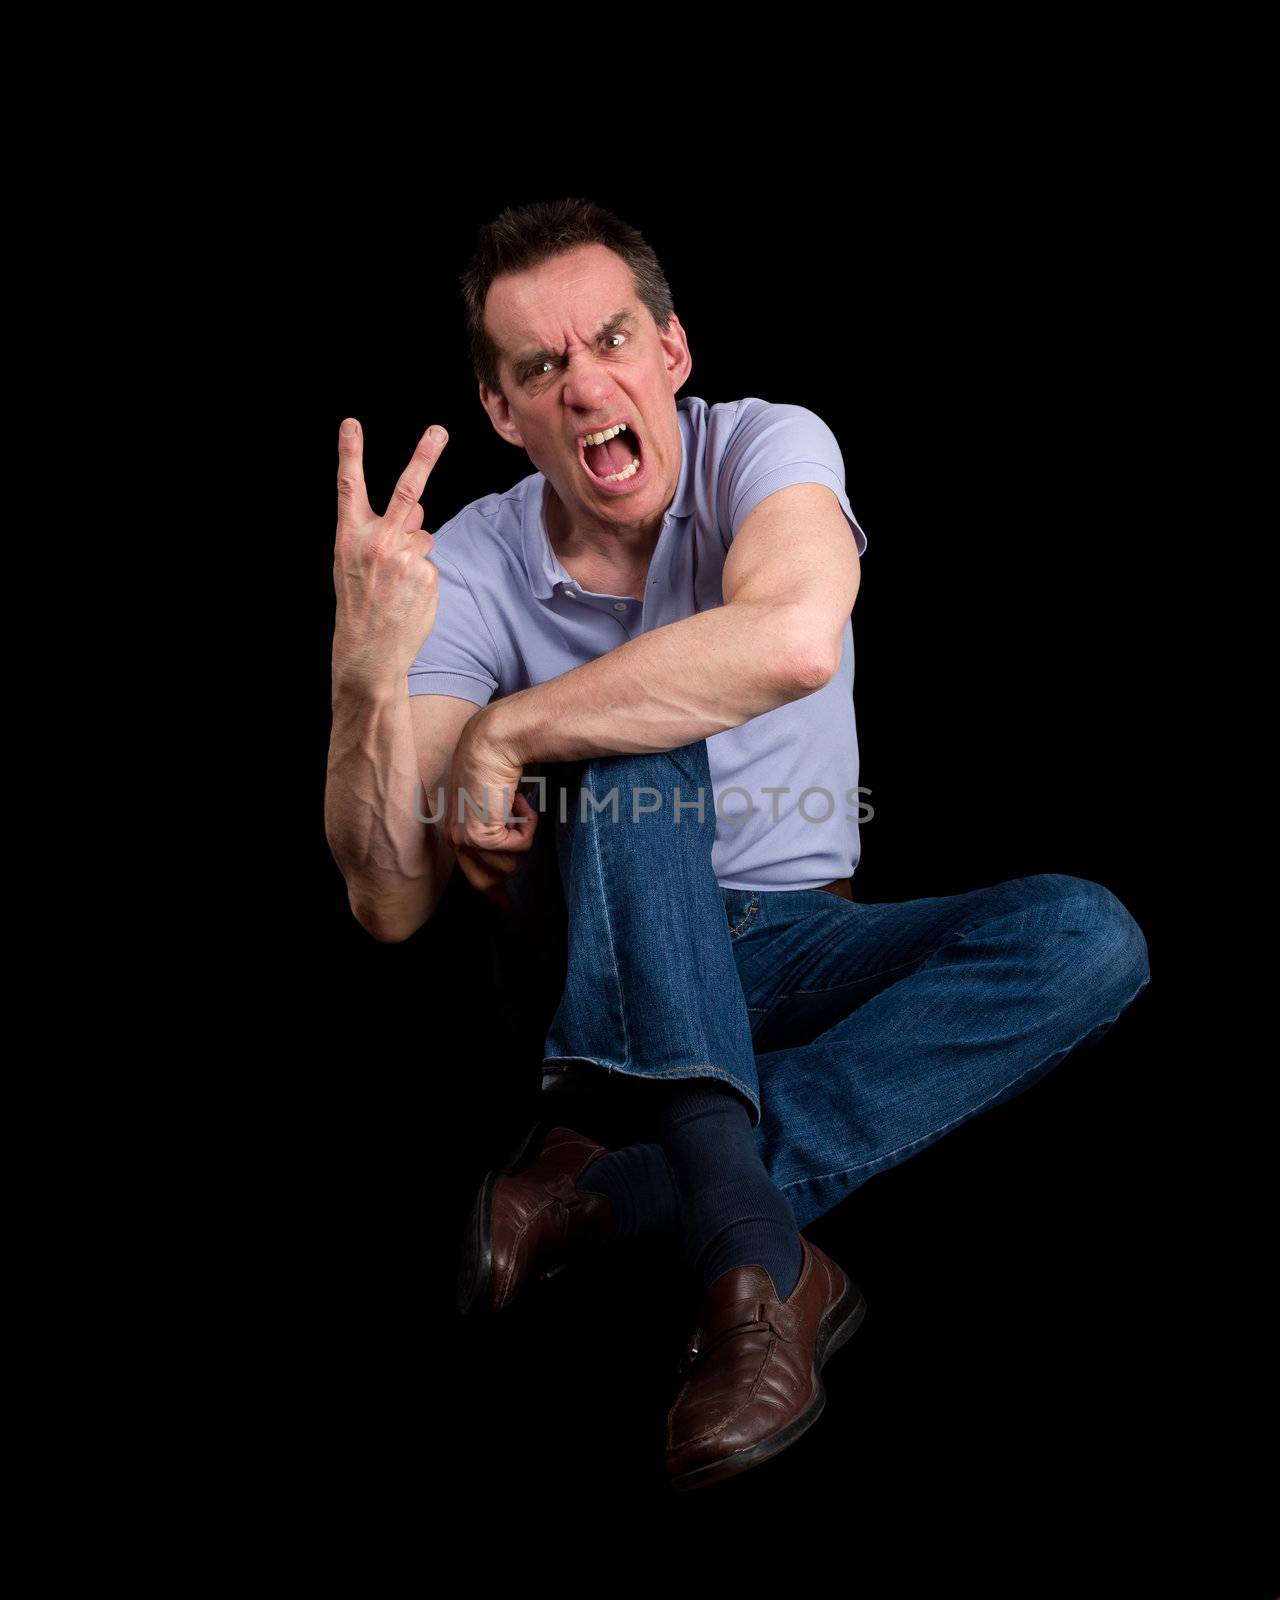 Angry Shouting Man Giving Two Finger Gesture by scheriton